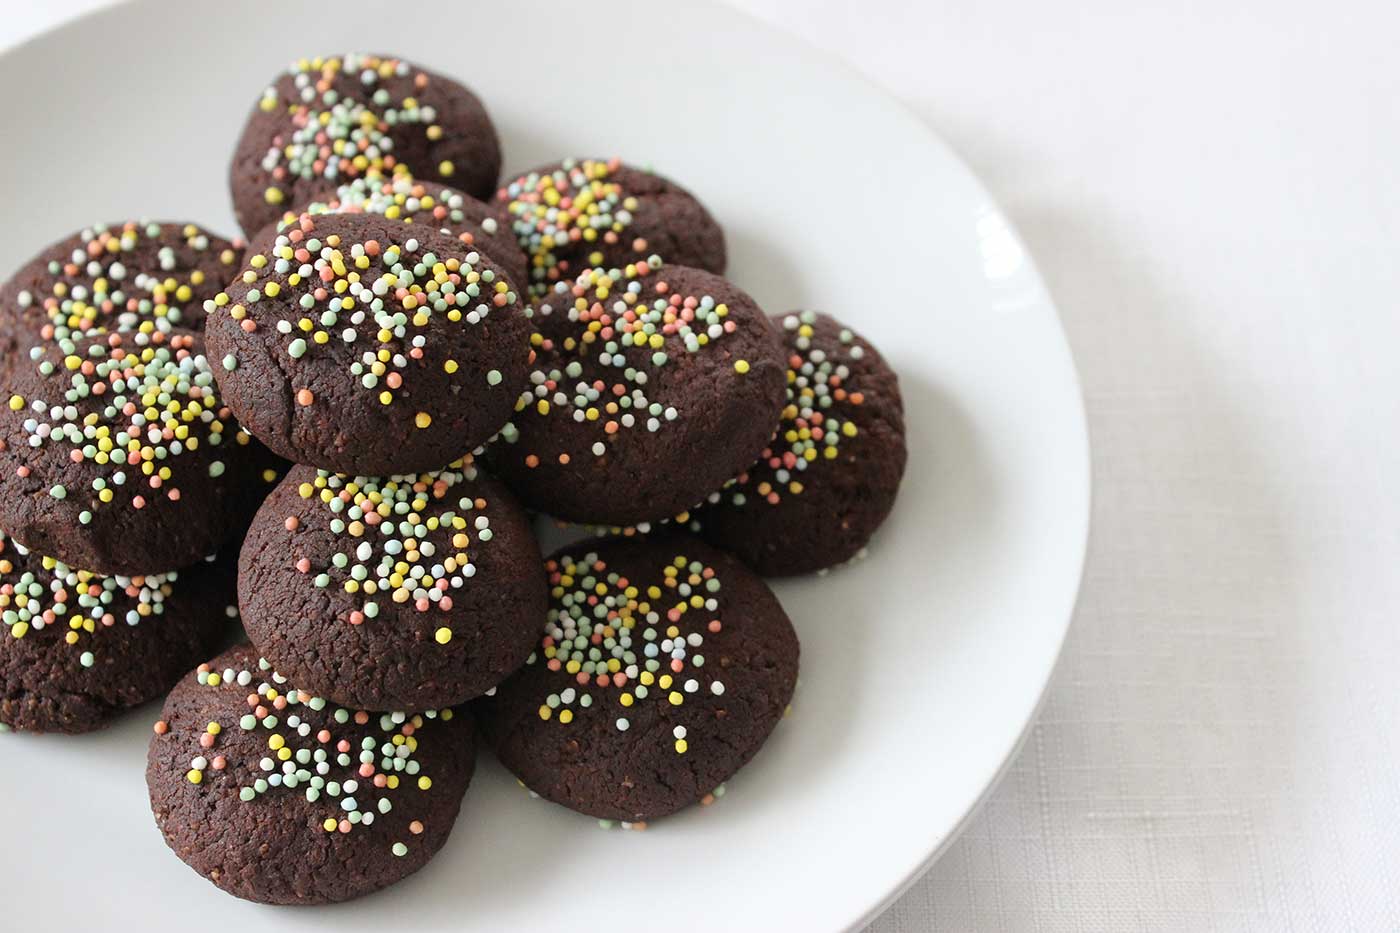 Chocolate-Chickpea-Biscuits-Thermomix-Recipe